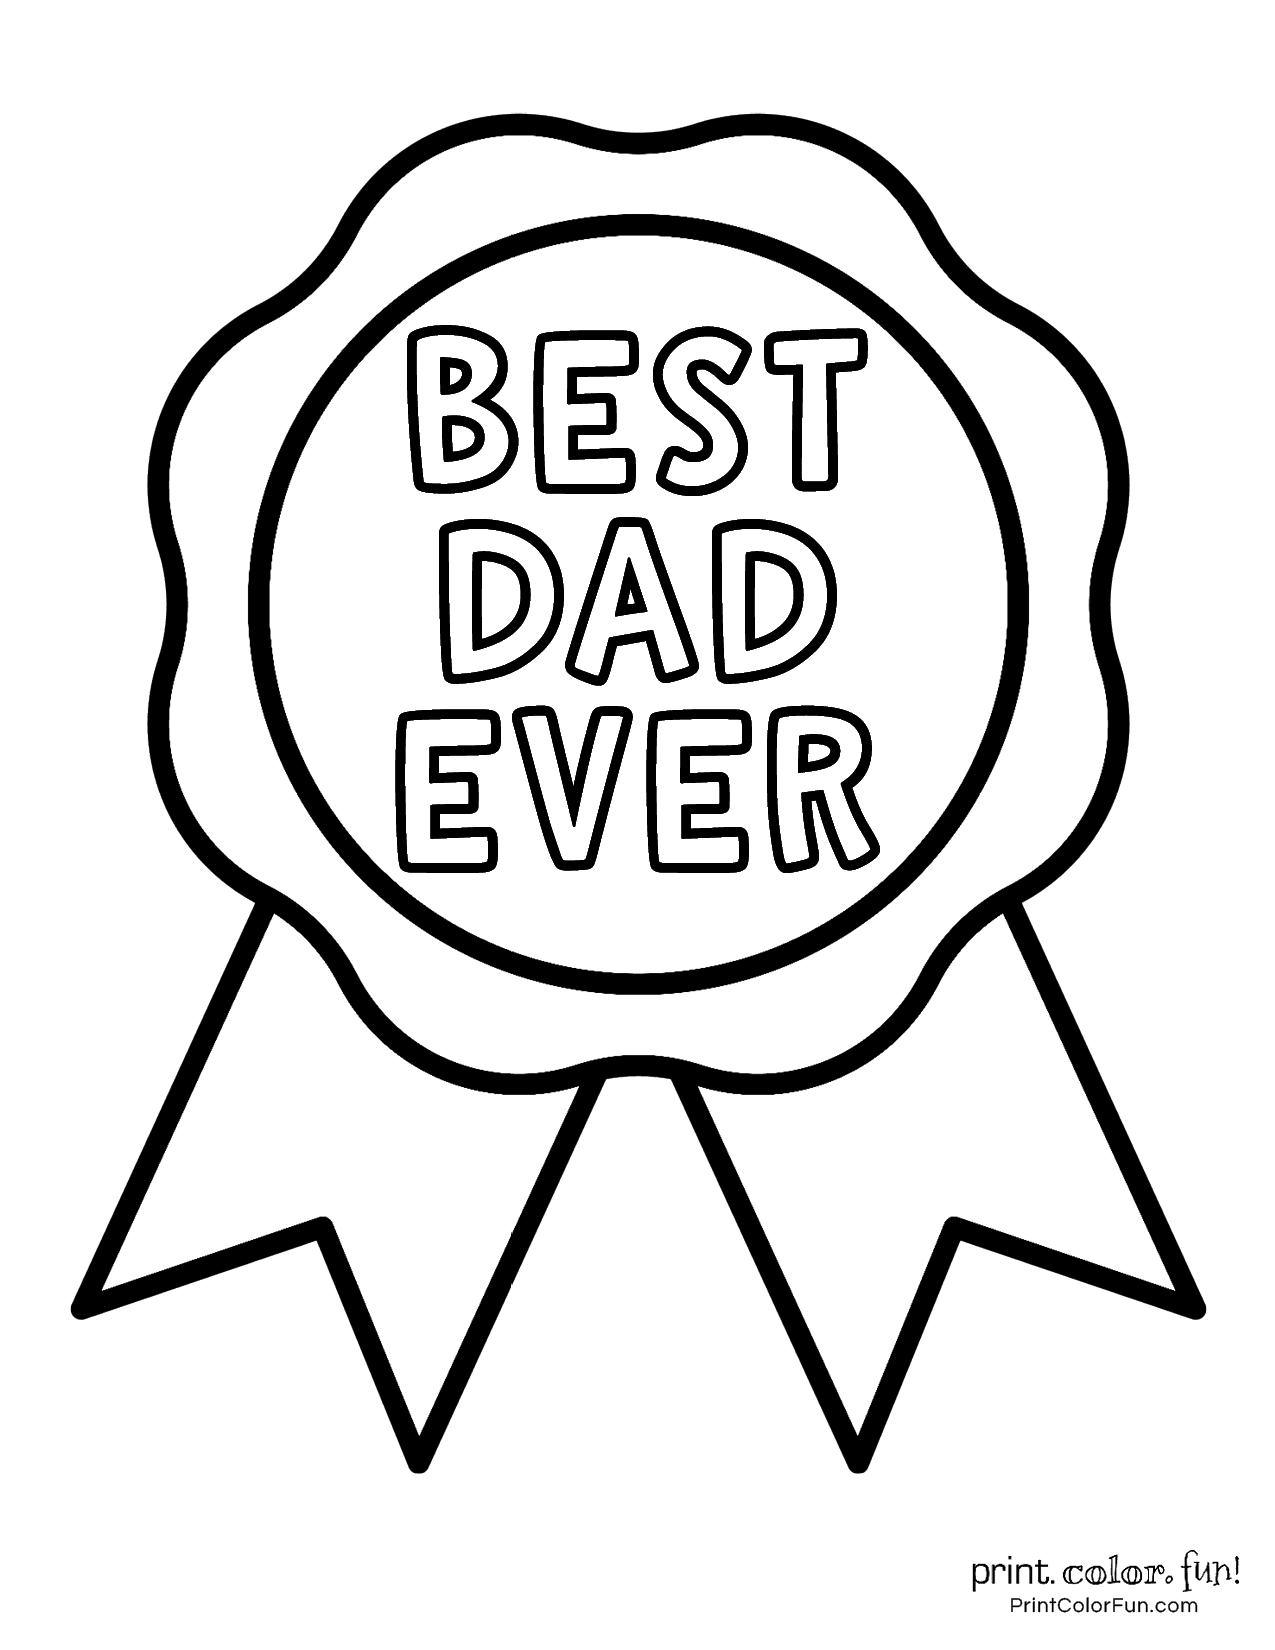 16 free printable Father's Day coloring pages Print. Color. Fun!